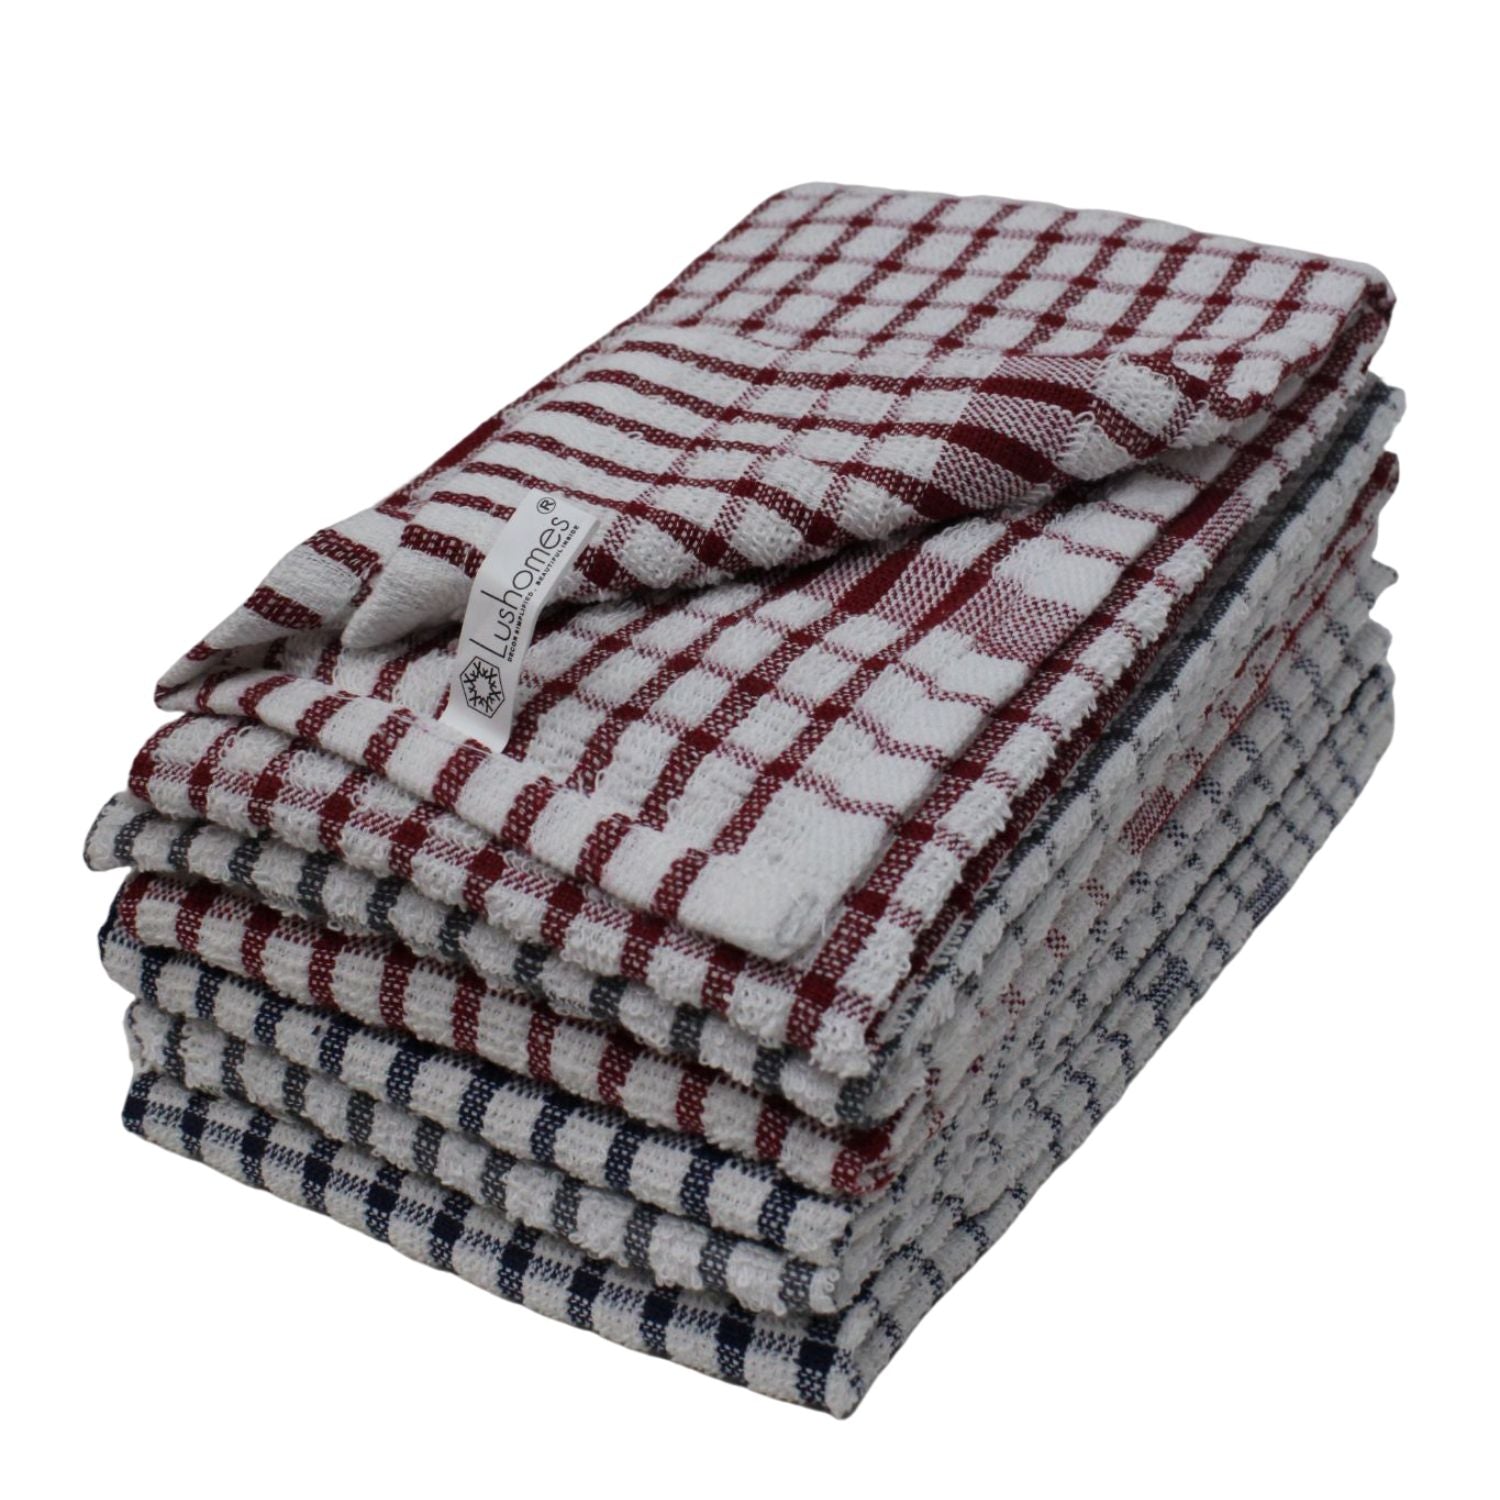 Lushomes Kitchen Towel, Kitchen Cleaning Cloth, Terry Cotton Dish Machine Washable Towels for Home Use, 6 Pcs Red Blue Grey Checks Hand Towel, Pack of 6 Towel, 16x26 Inches , 300 GSM (45x68 Cms, Set of 6, Napking for Hand Towels )